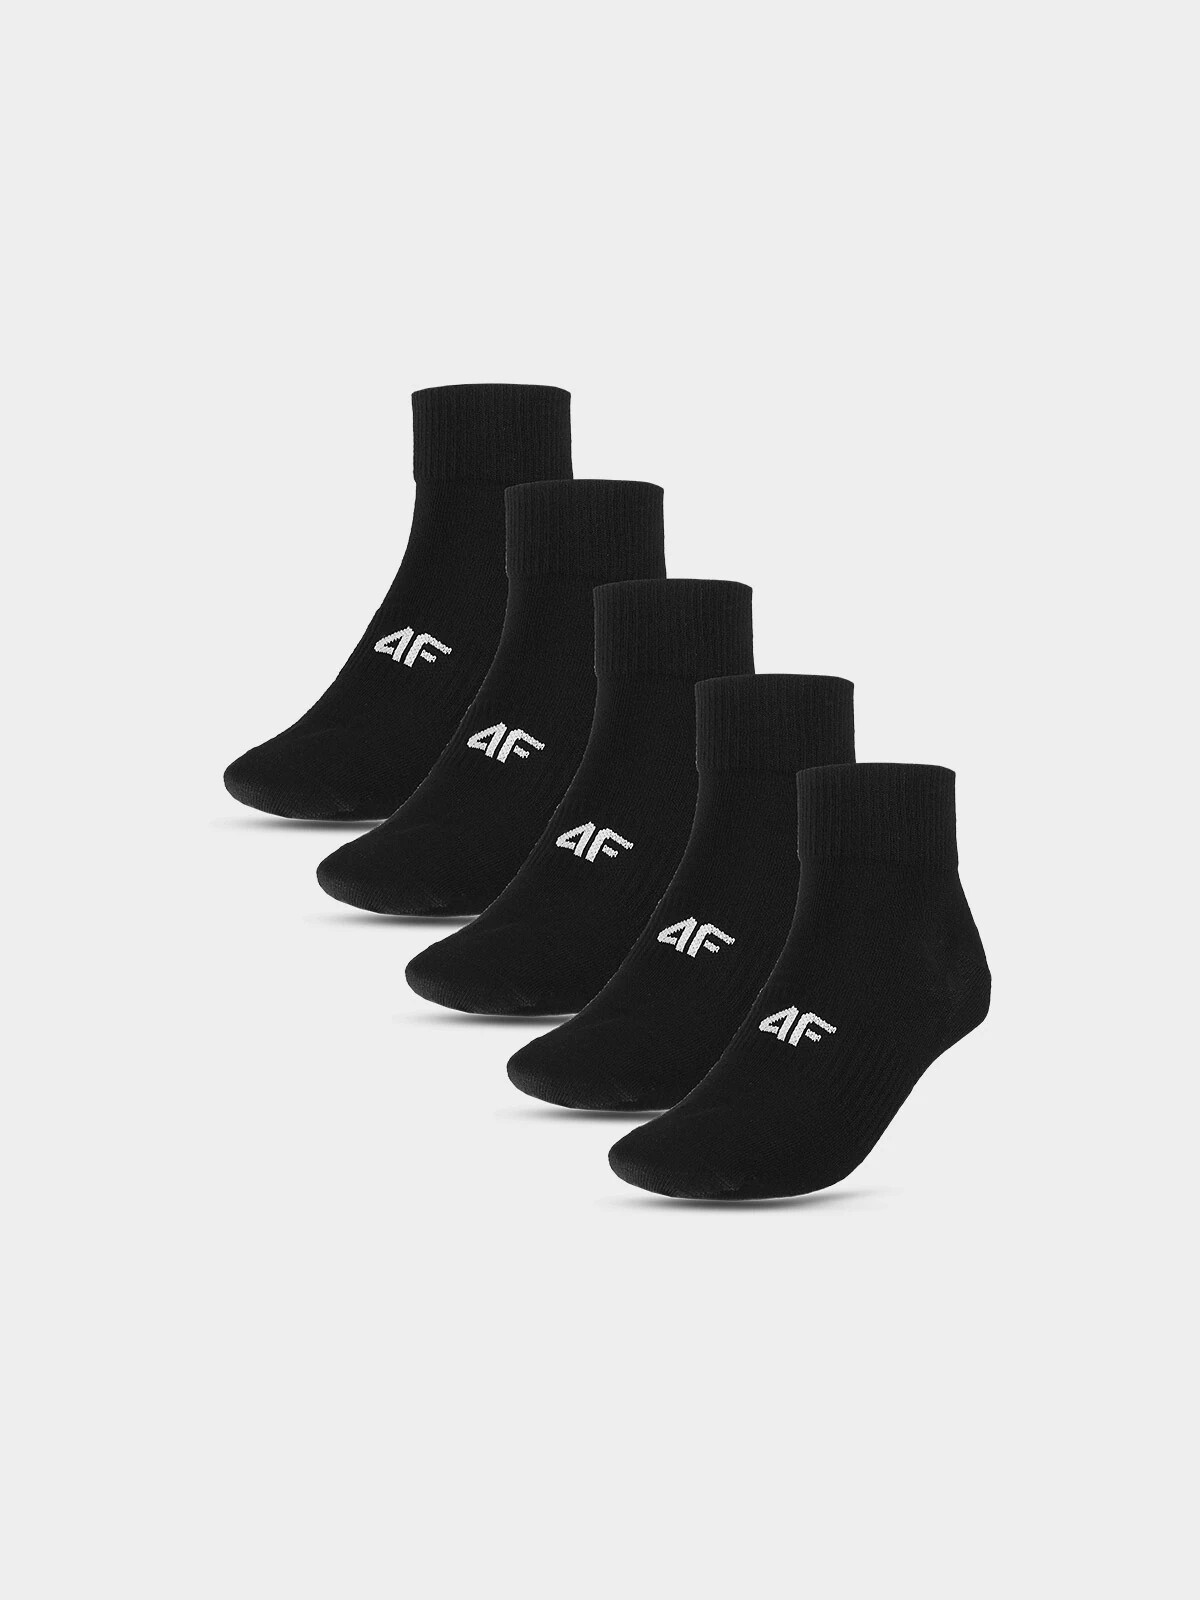 Men's Casual Socks Above the Ankle (5pack) 4F - Black